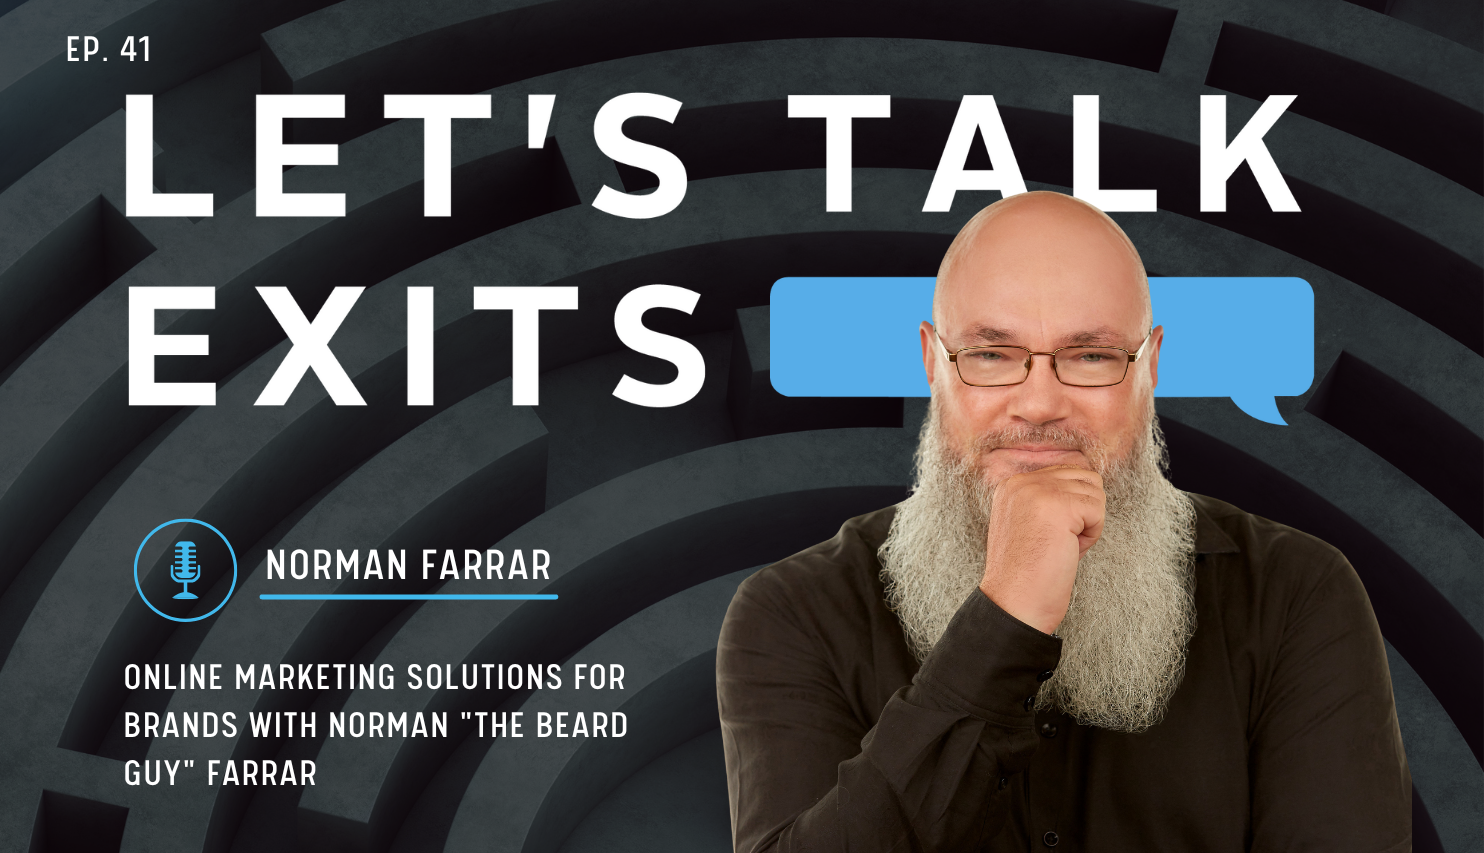 Online Marketing Solutions for Brands with Norman "The Beard Guy" Farrar